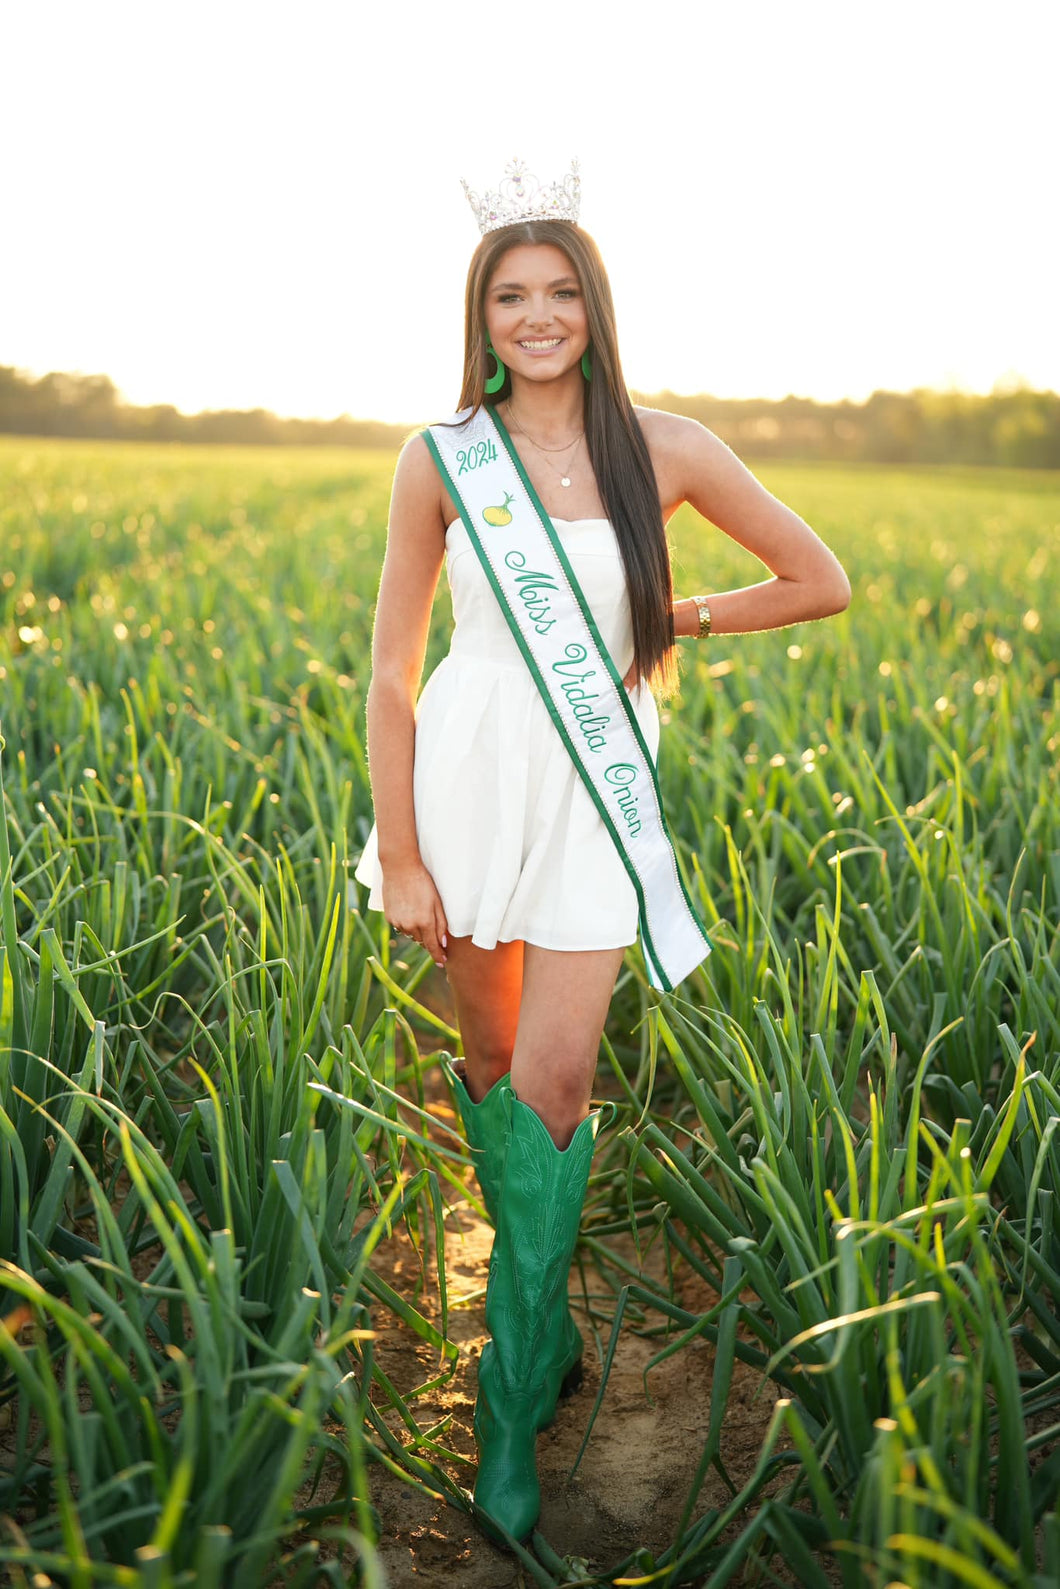 Kennedy's Kelly Green Cowgirl Boots